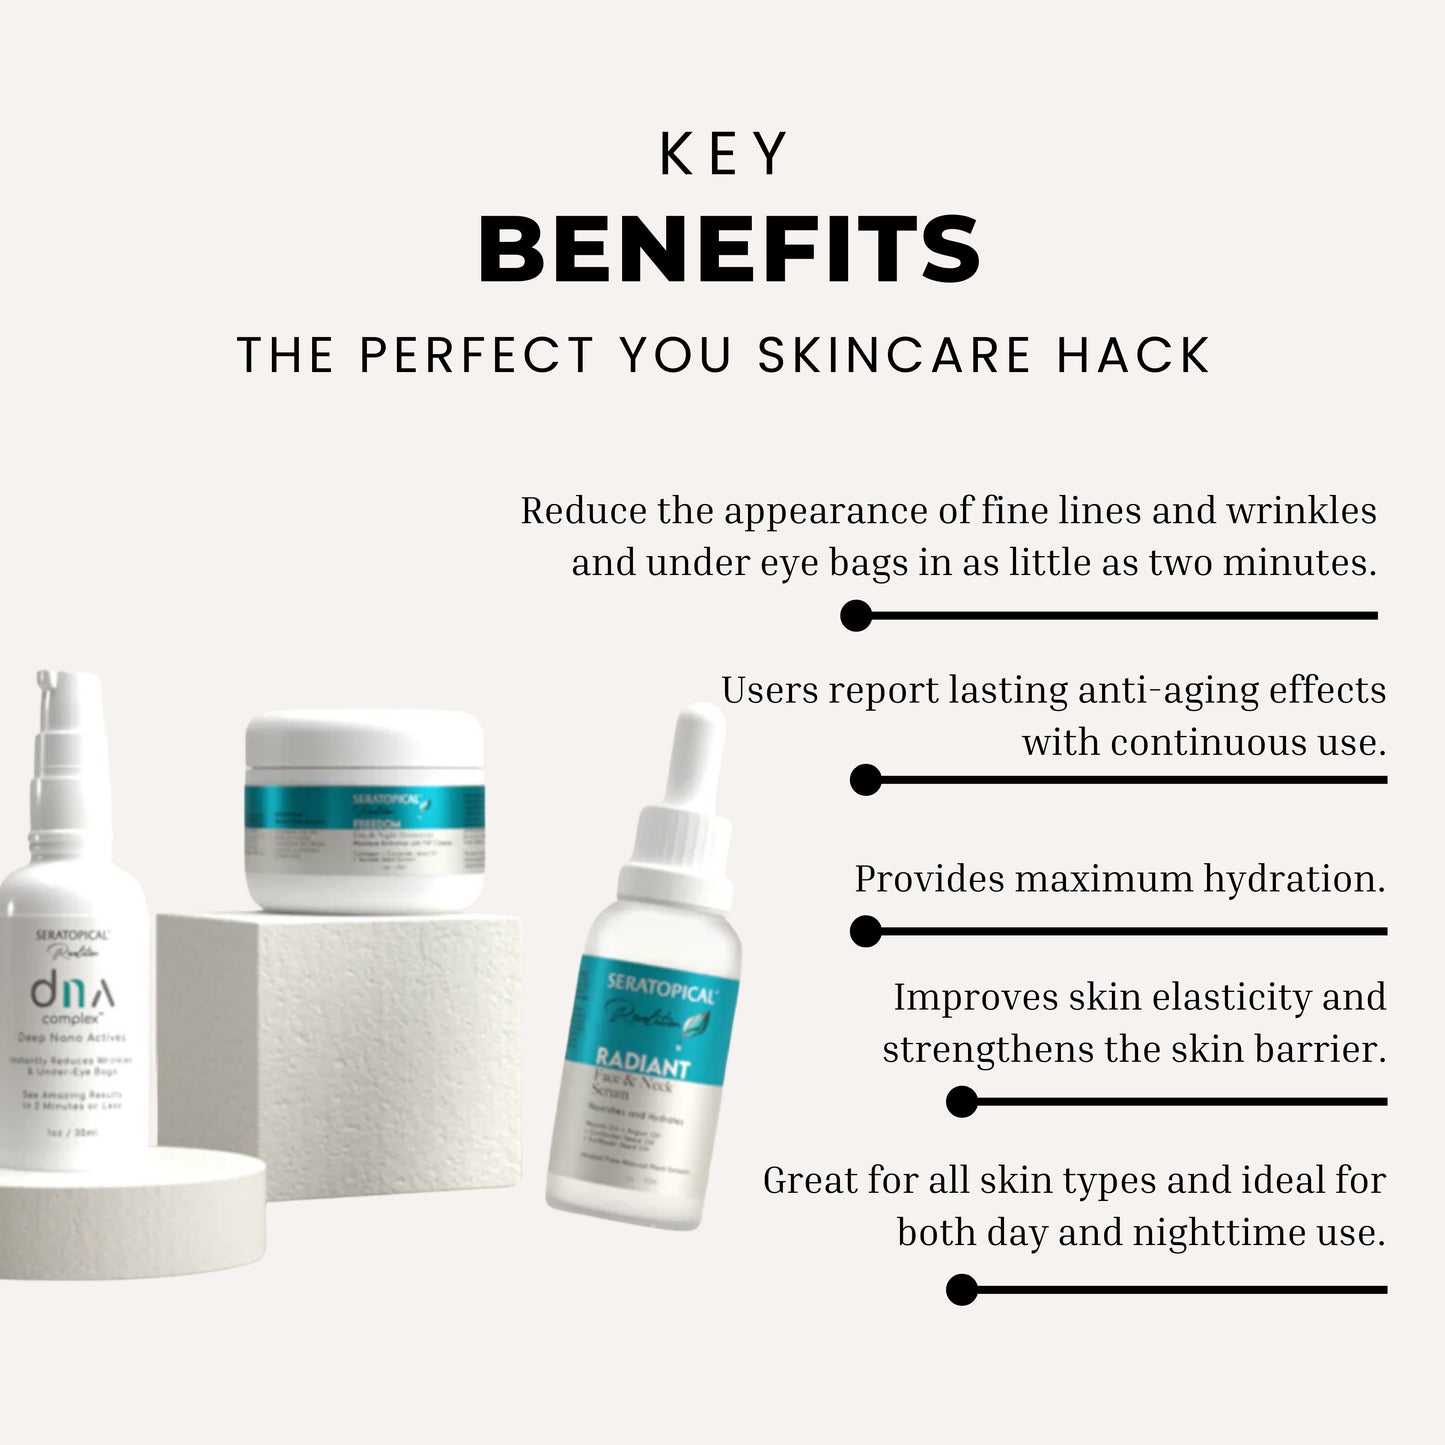 The Perfect You Skincare Hack